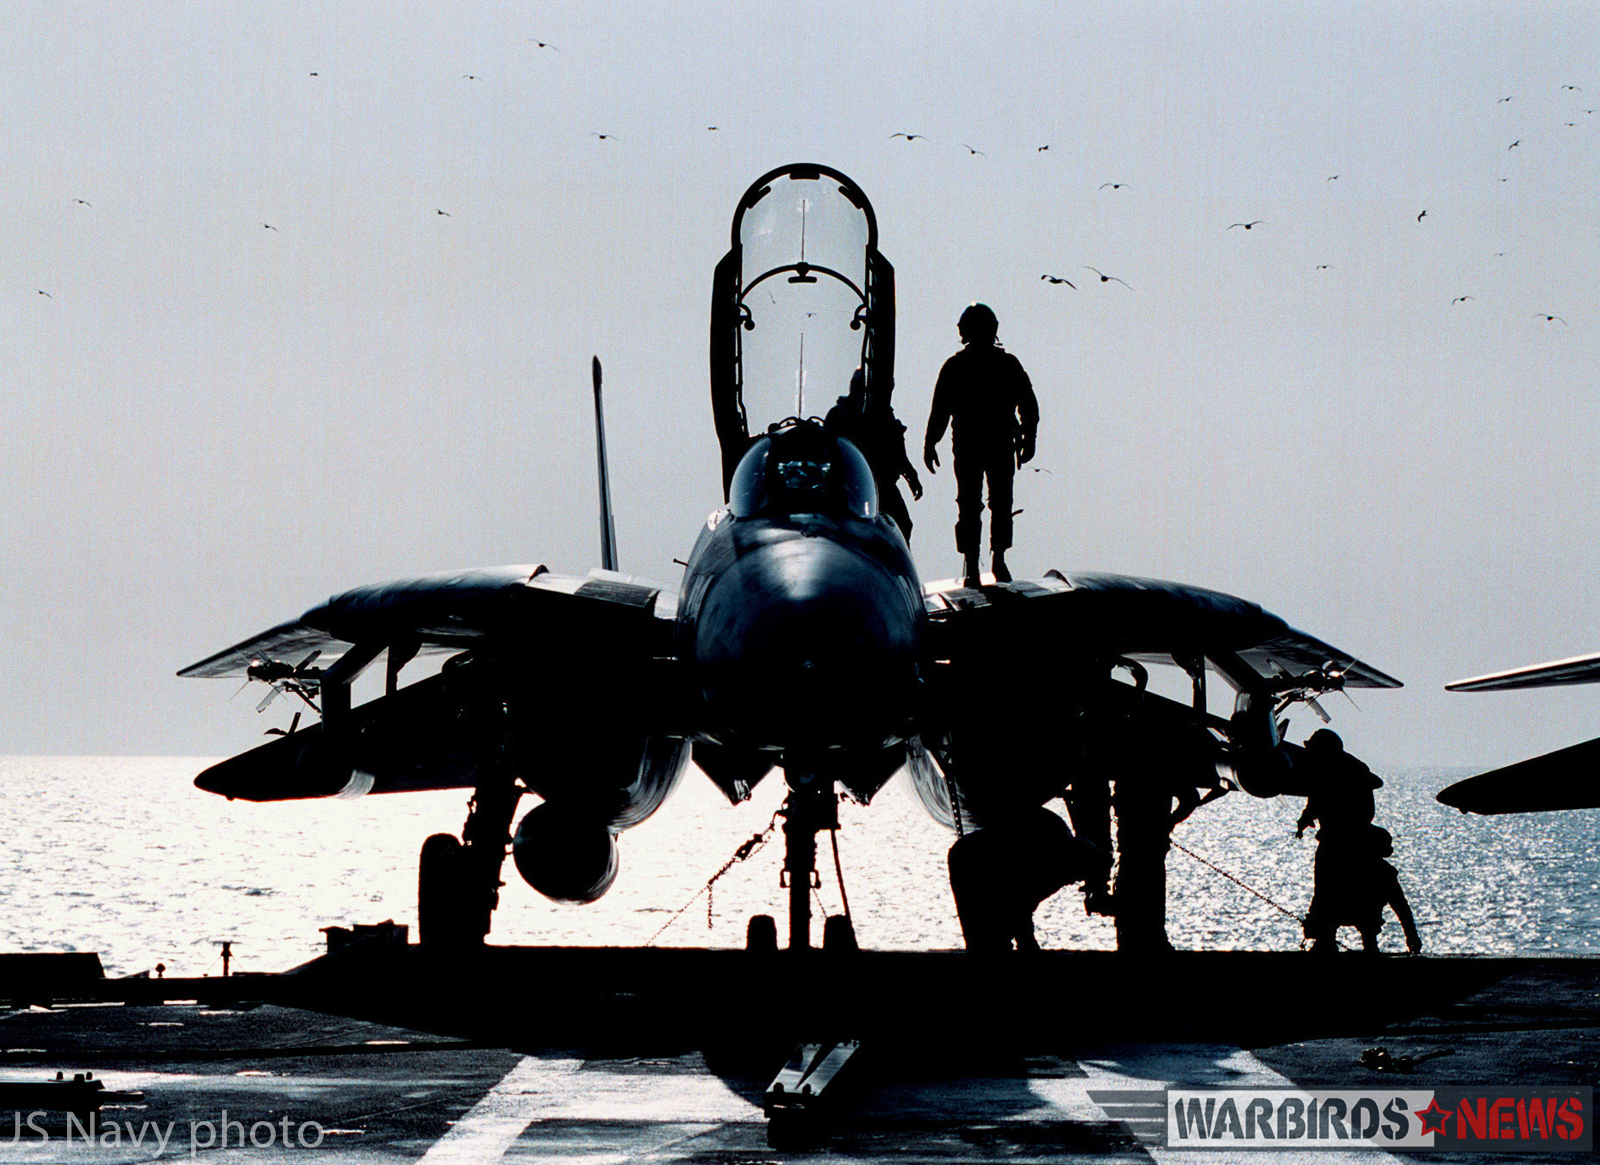 Aboard USS George Washington (February 2, 1998) -- A pilot from Fighter Squadron One Zero Two gives his F-14B “Tomcat” a pre flight inspection on the flight deck. VF-102 and USS George Washington (CVN 73) are currently conducting operations in the Arabian Gulf during a six month deployment. Official U.S. Navy photo by Photographer’s Mate 3rd Class Joseph Hendricks. (RELEASED)